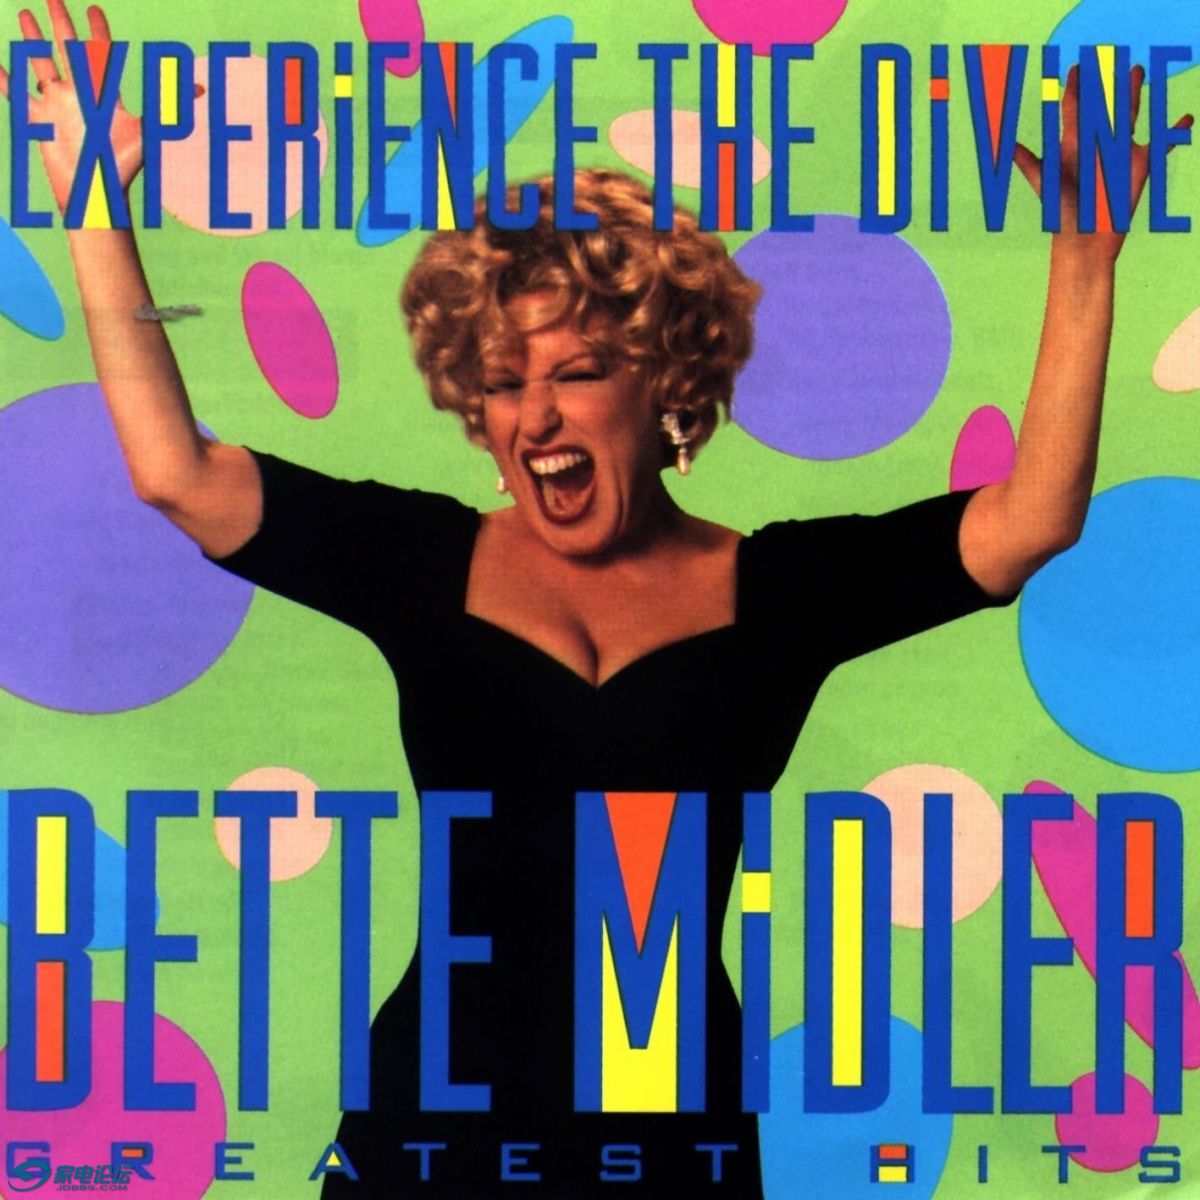 Bette Midler - Experience The Divine- Greatest Hits -  - .jpg